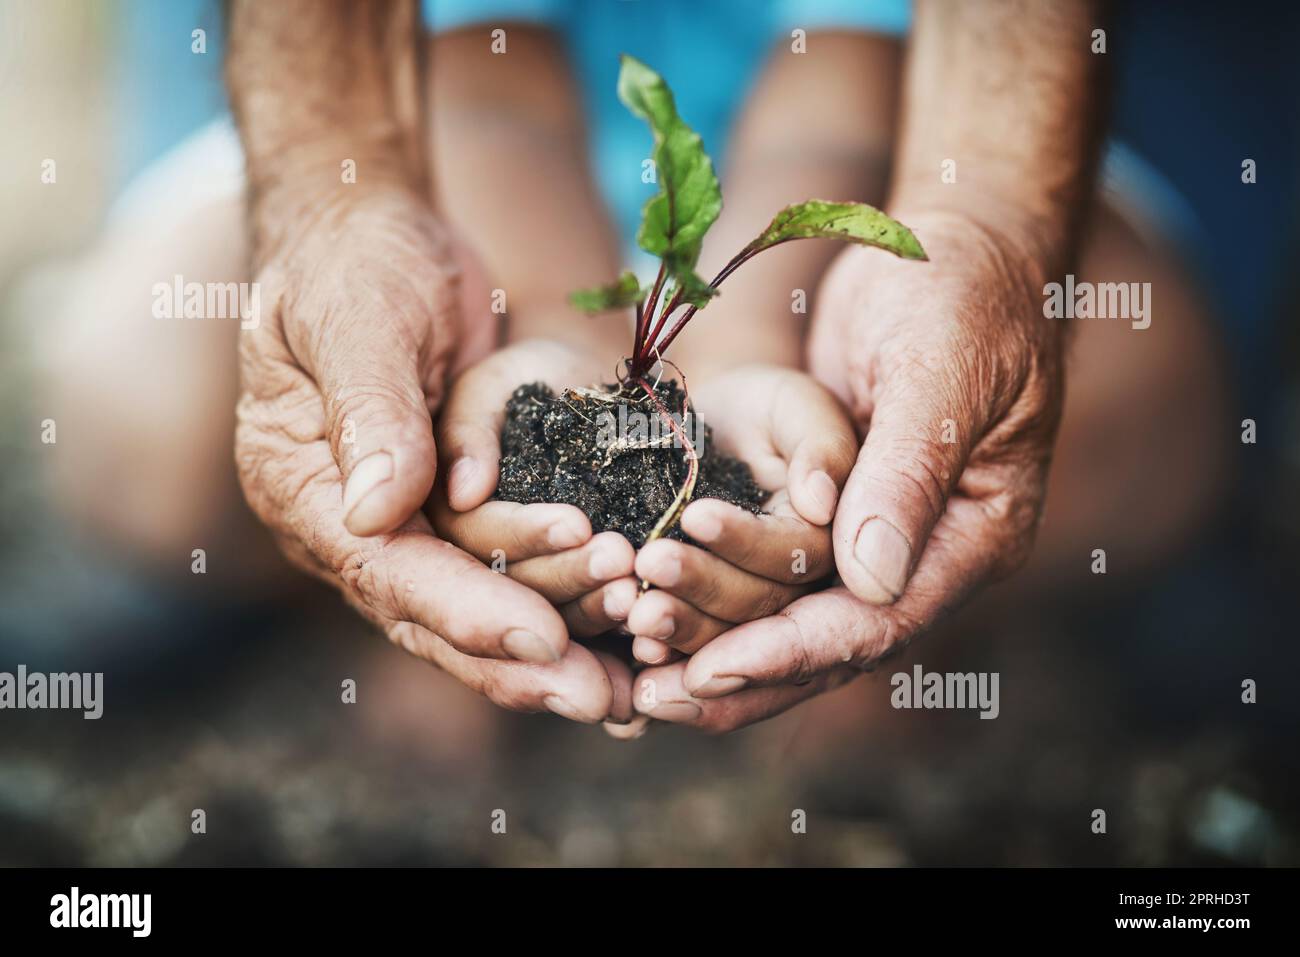 Teach kids how far a little care can go. Closeup shot of an adult and child holding a plant growing out of soil. Stock Photo